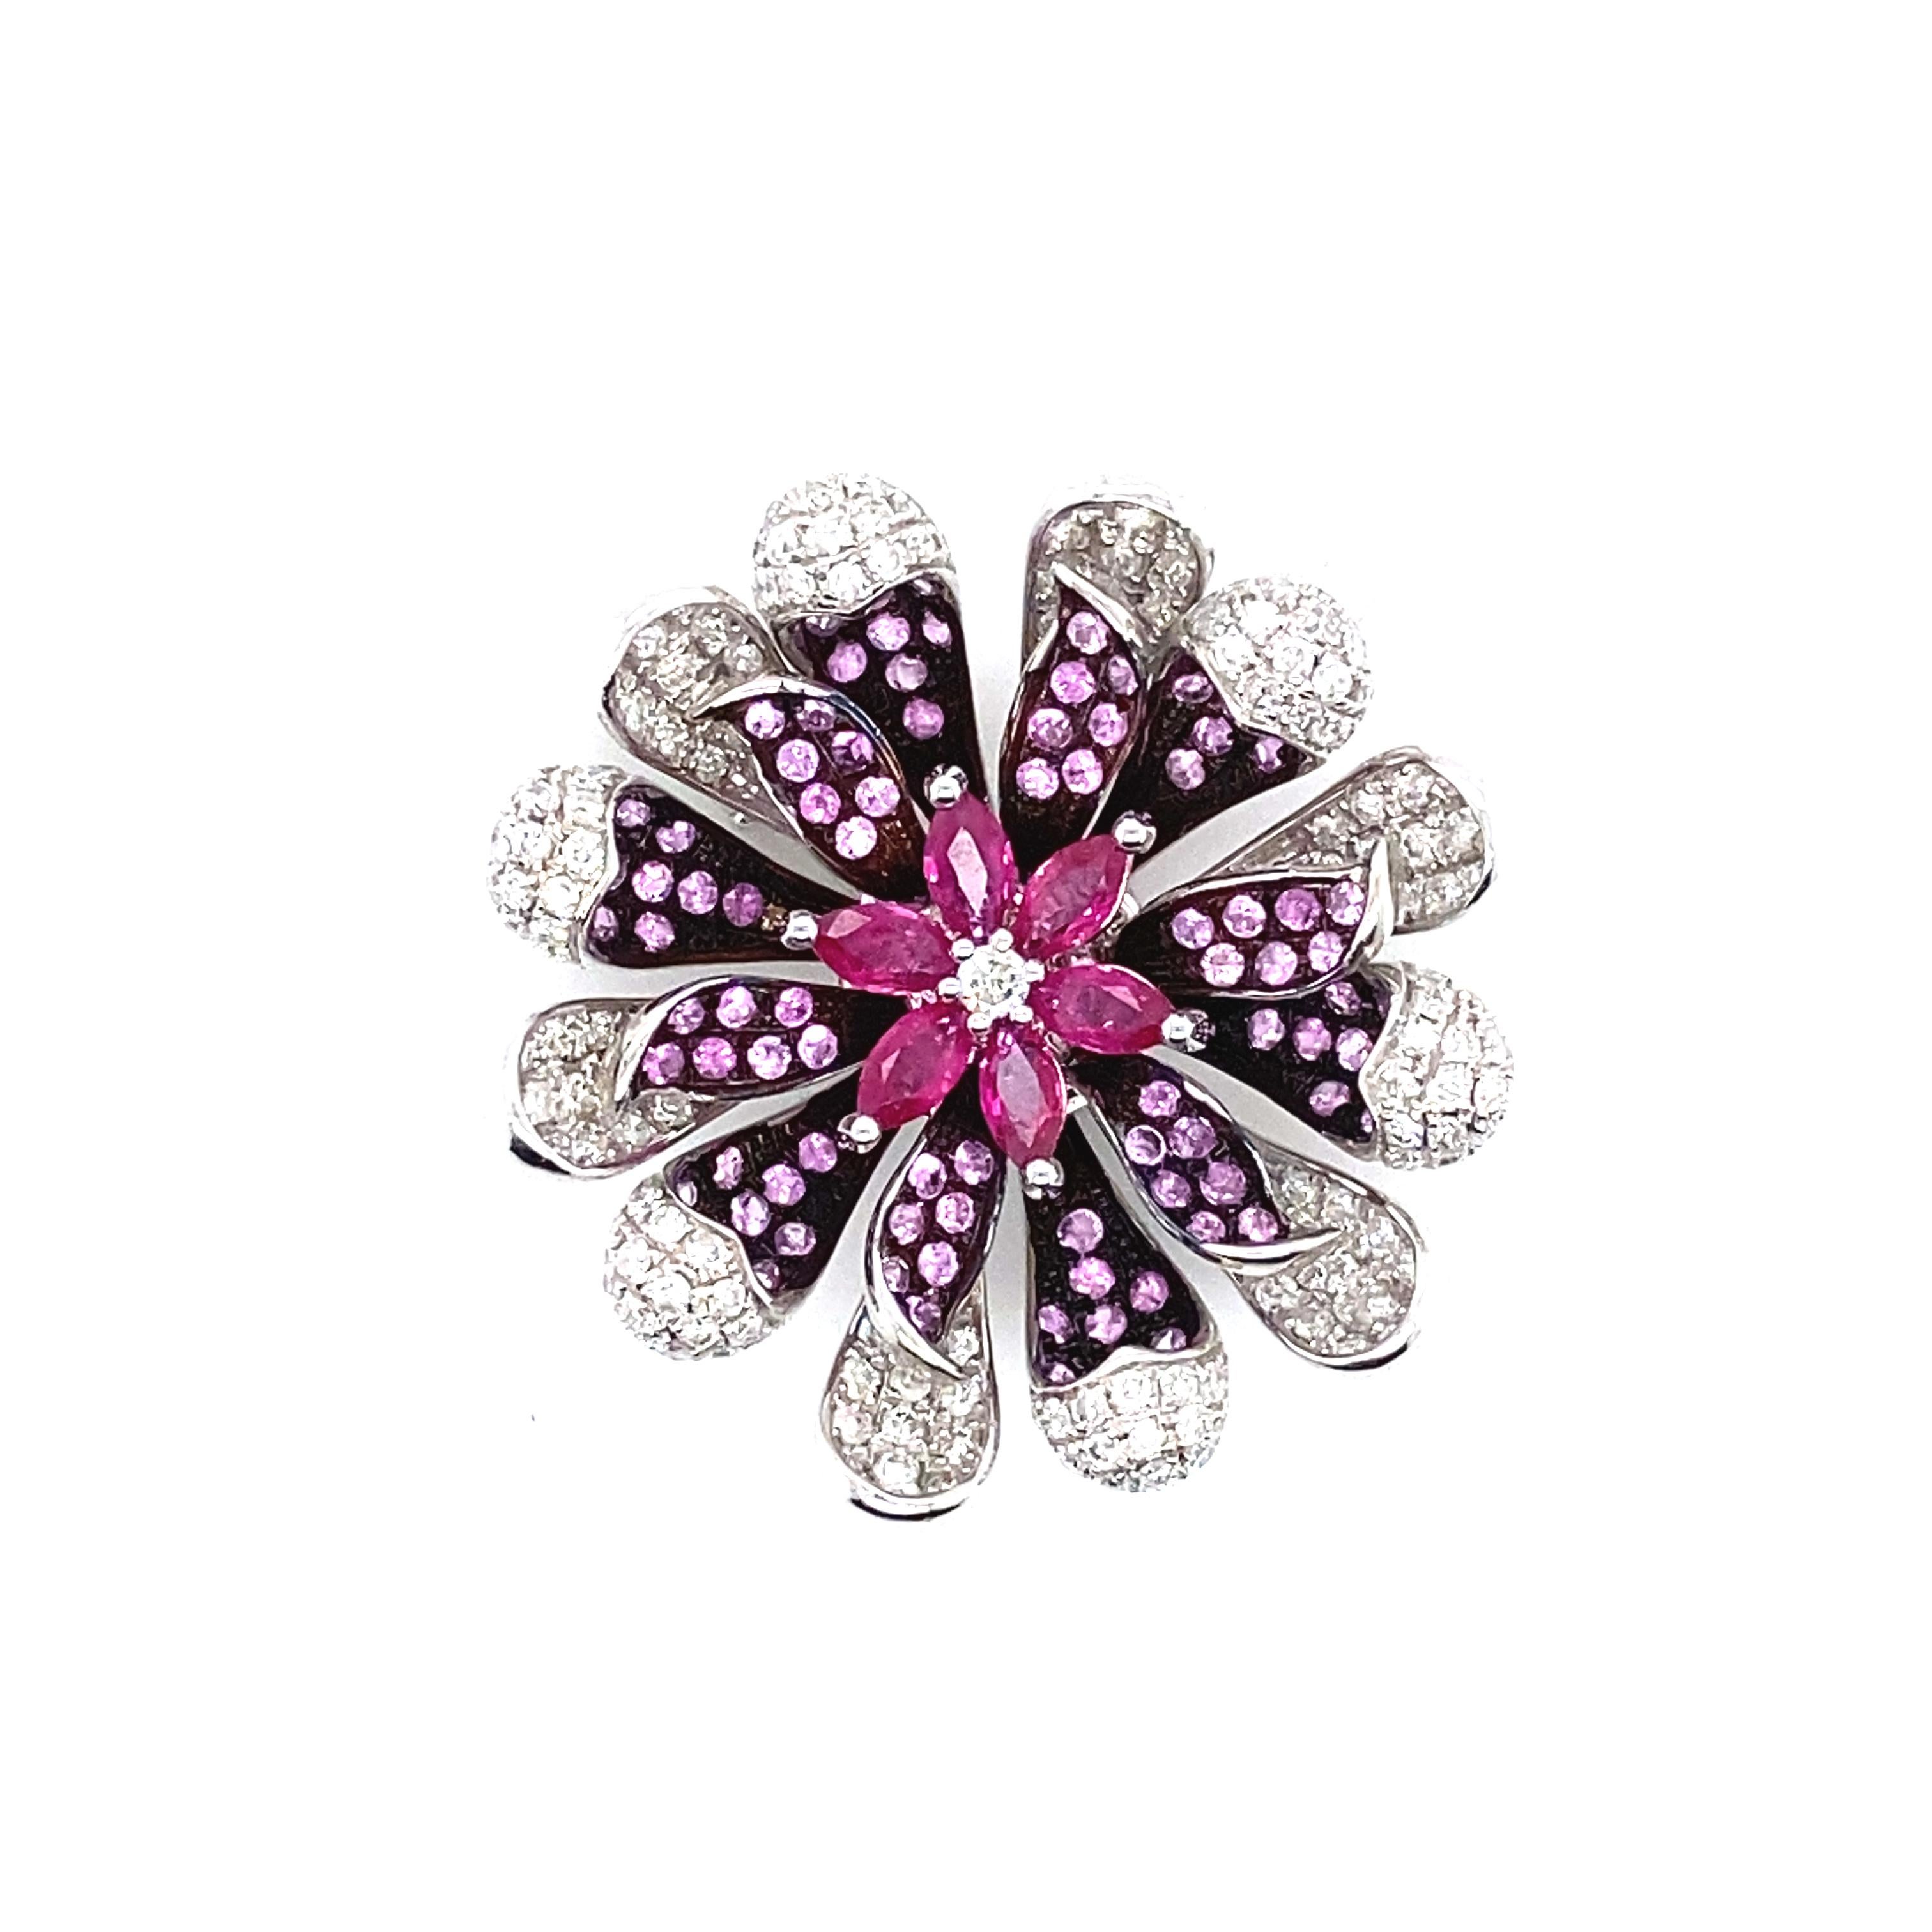 A beautiful Brooch/Pendant set in 18K White Gold featuring 0.85 Carats Natural Rubies, 0.80 Carats Pink Sapphire and 1.15 Carat Diamonds. Rubies are referred to as 